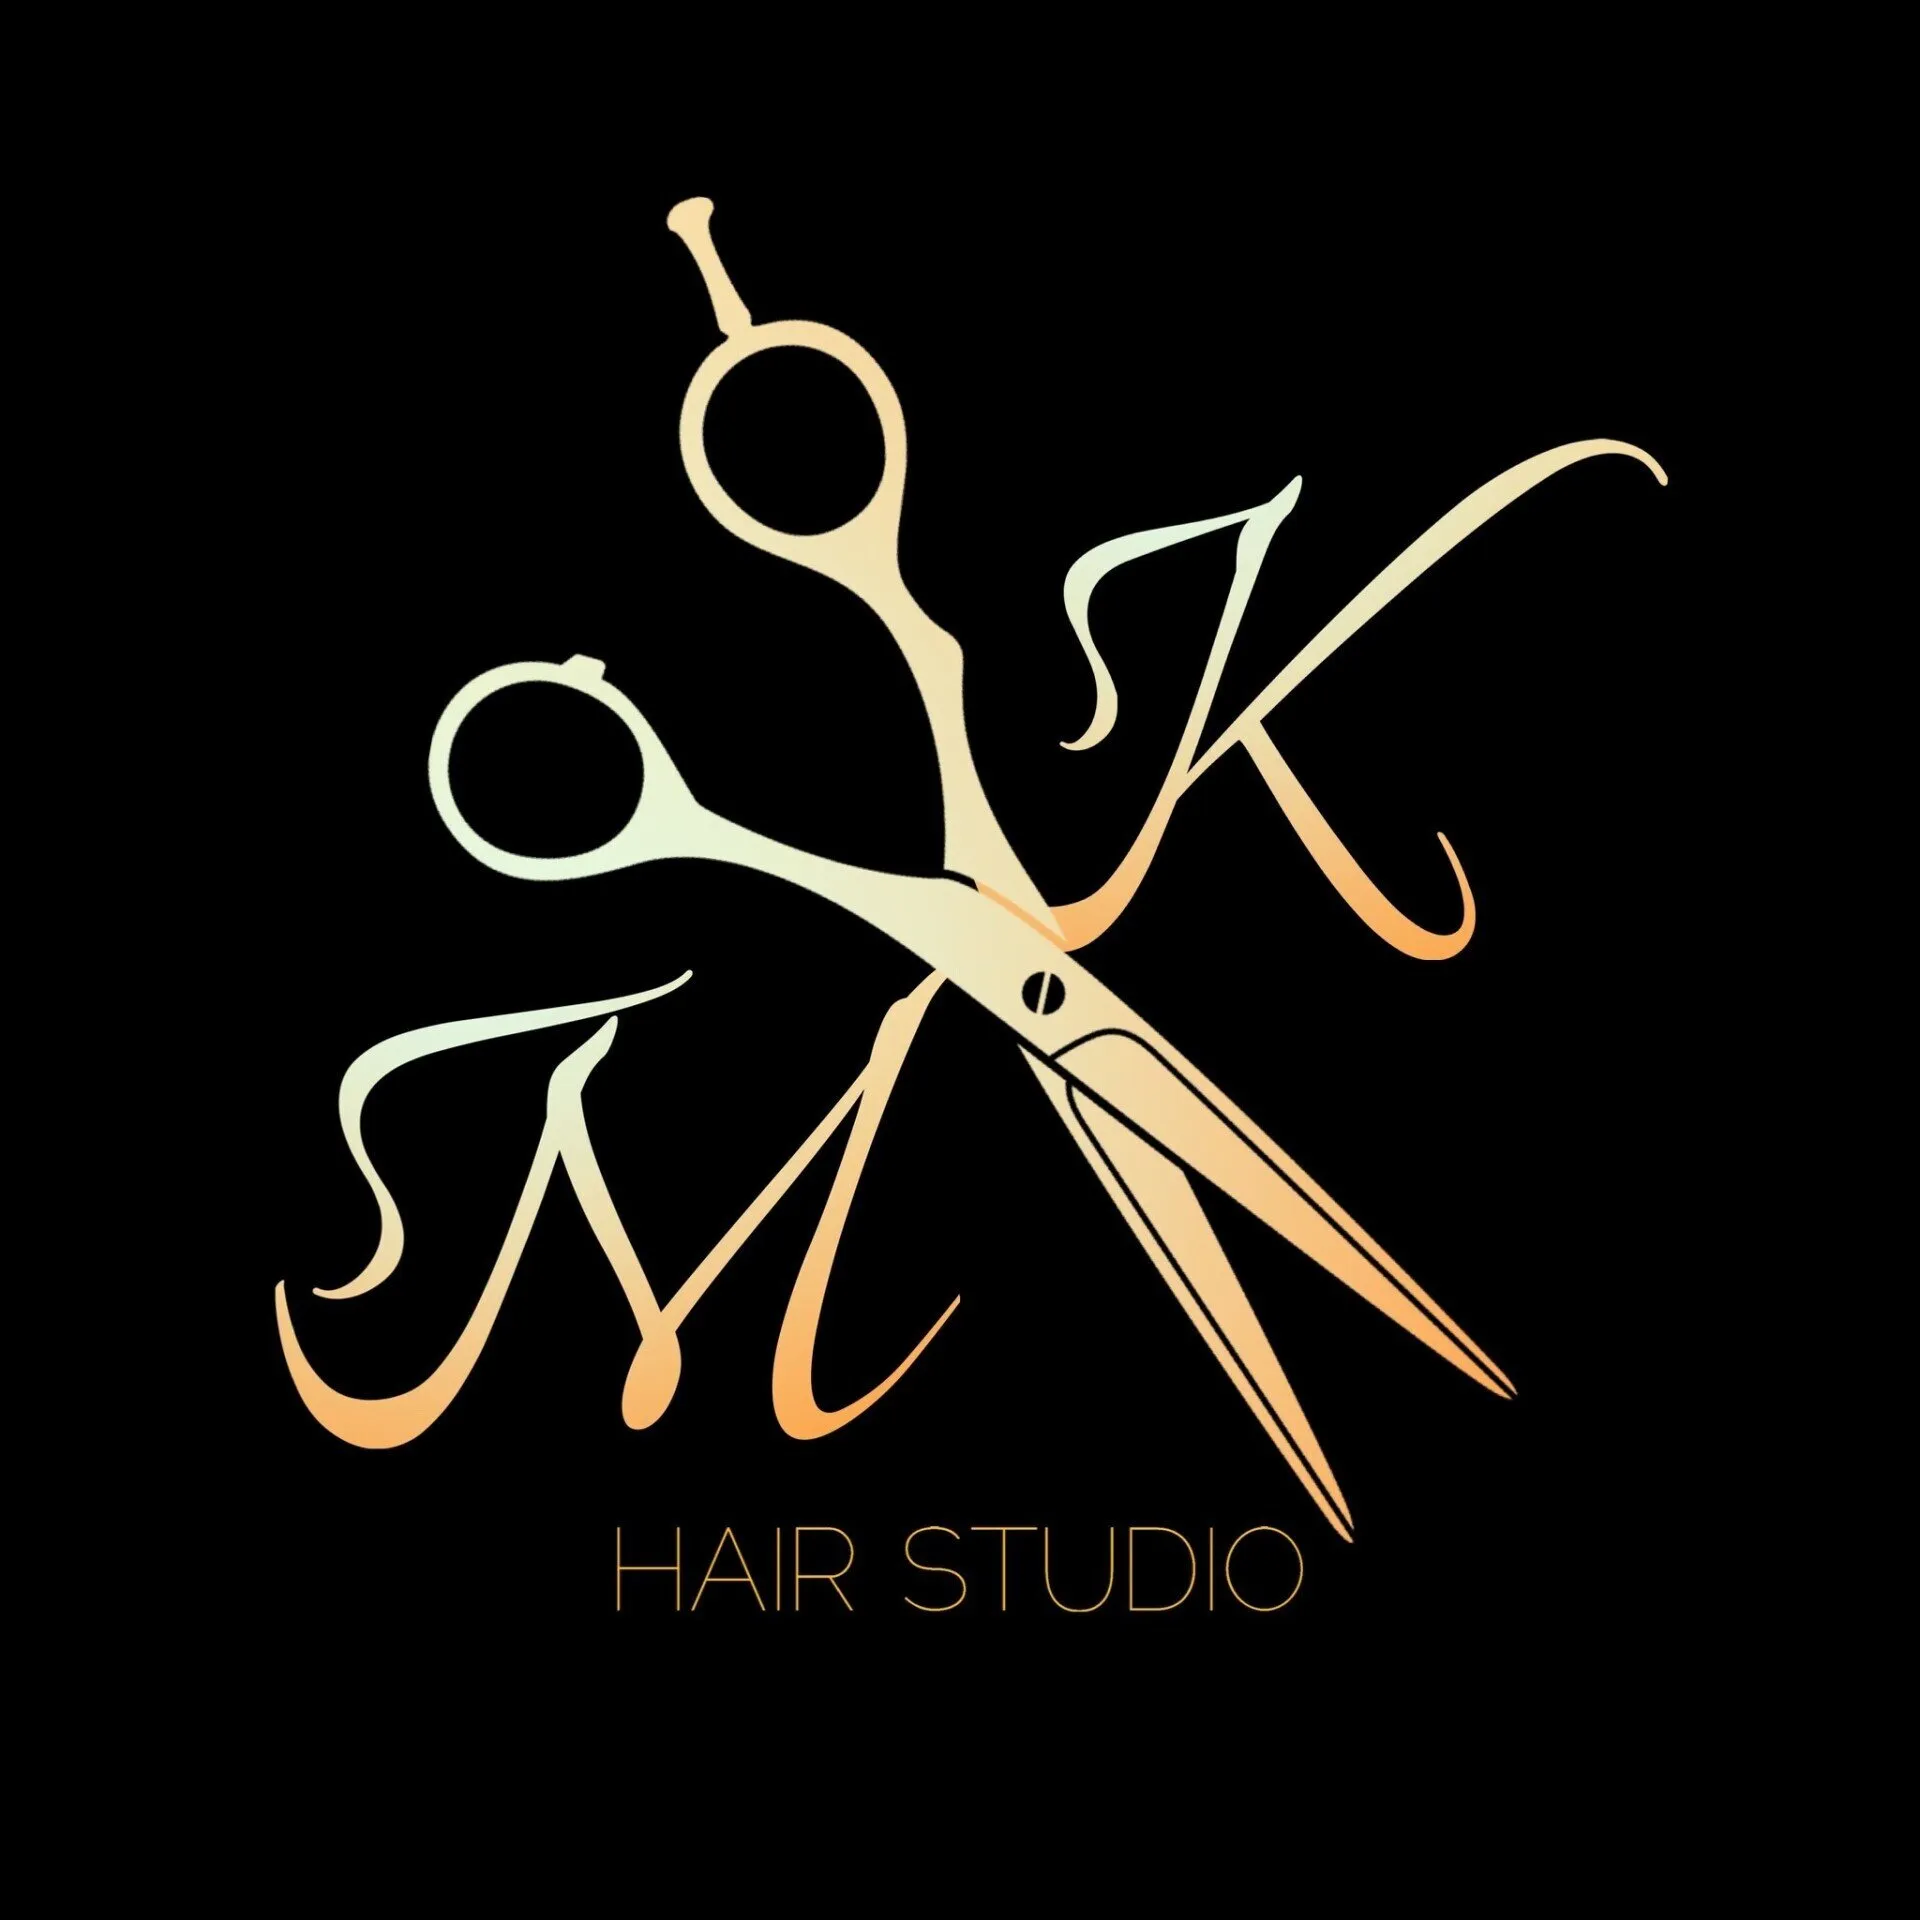 A logo for a hair studio with scissors and the letter k